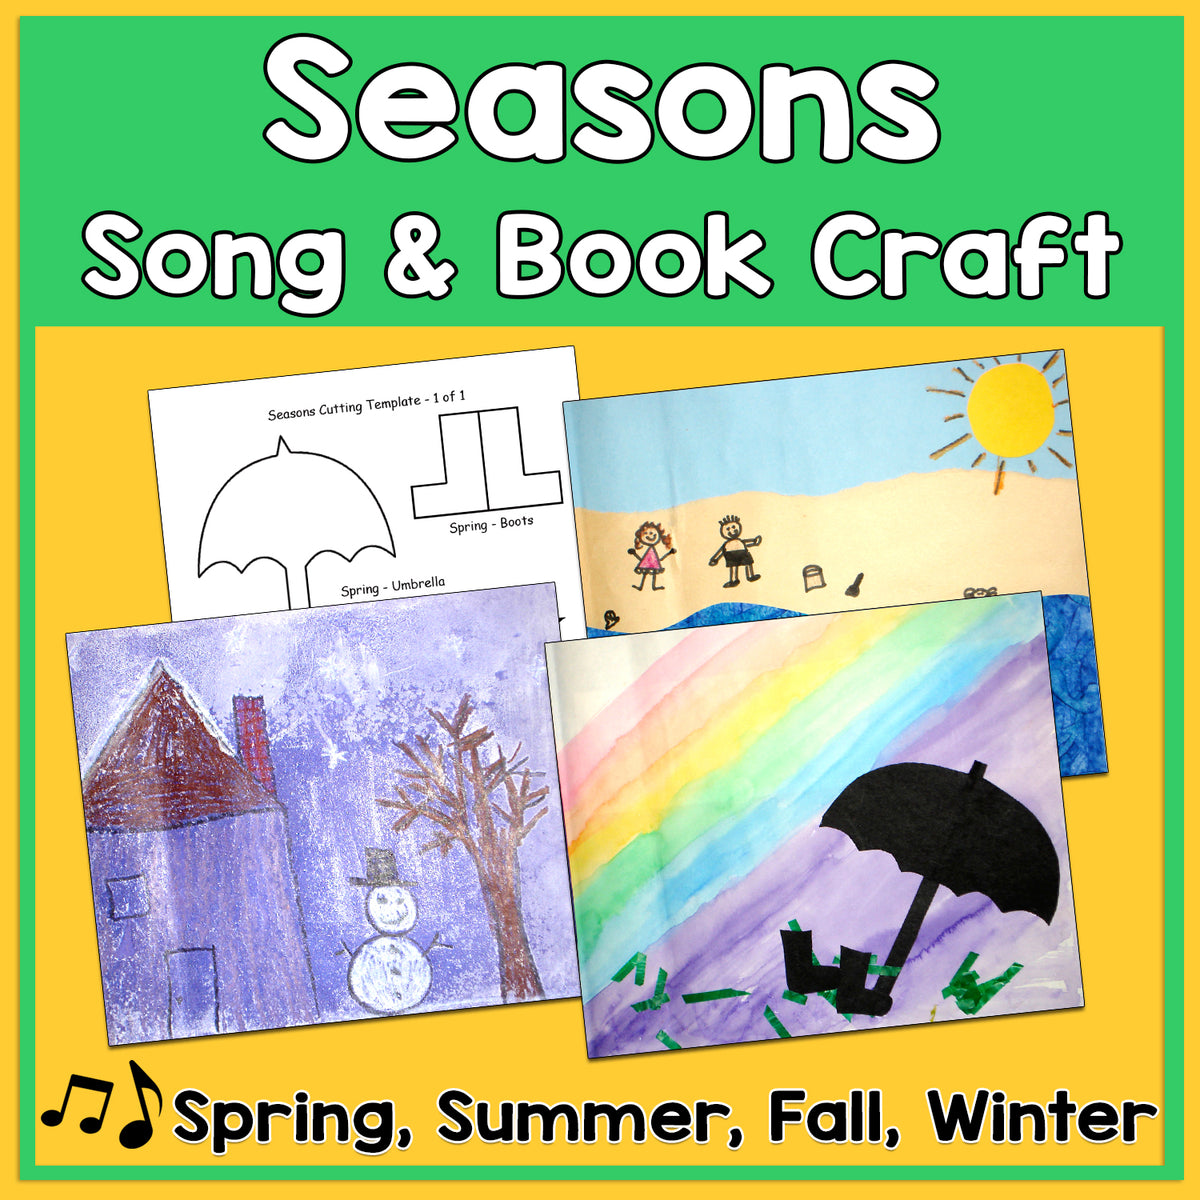 The Seasons Song & Book Craft